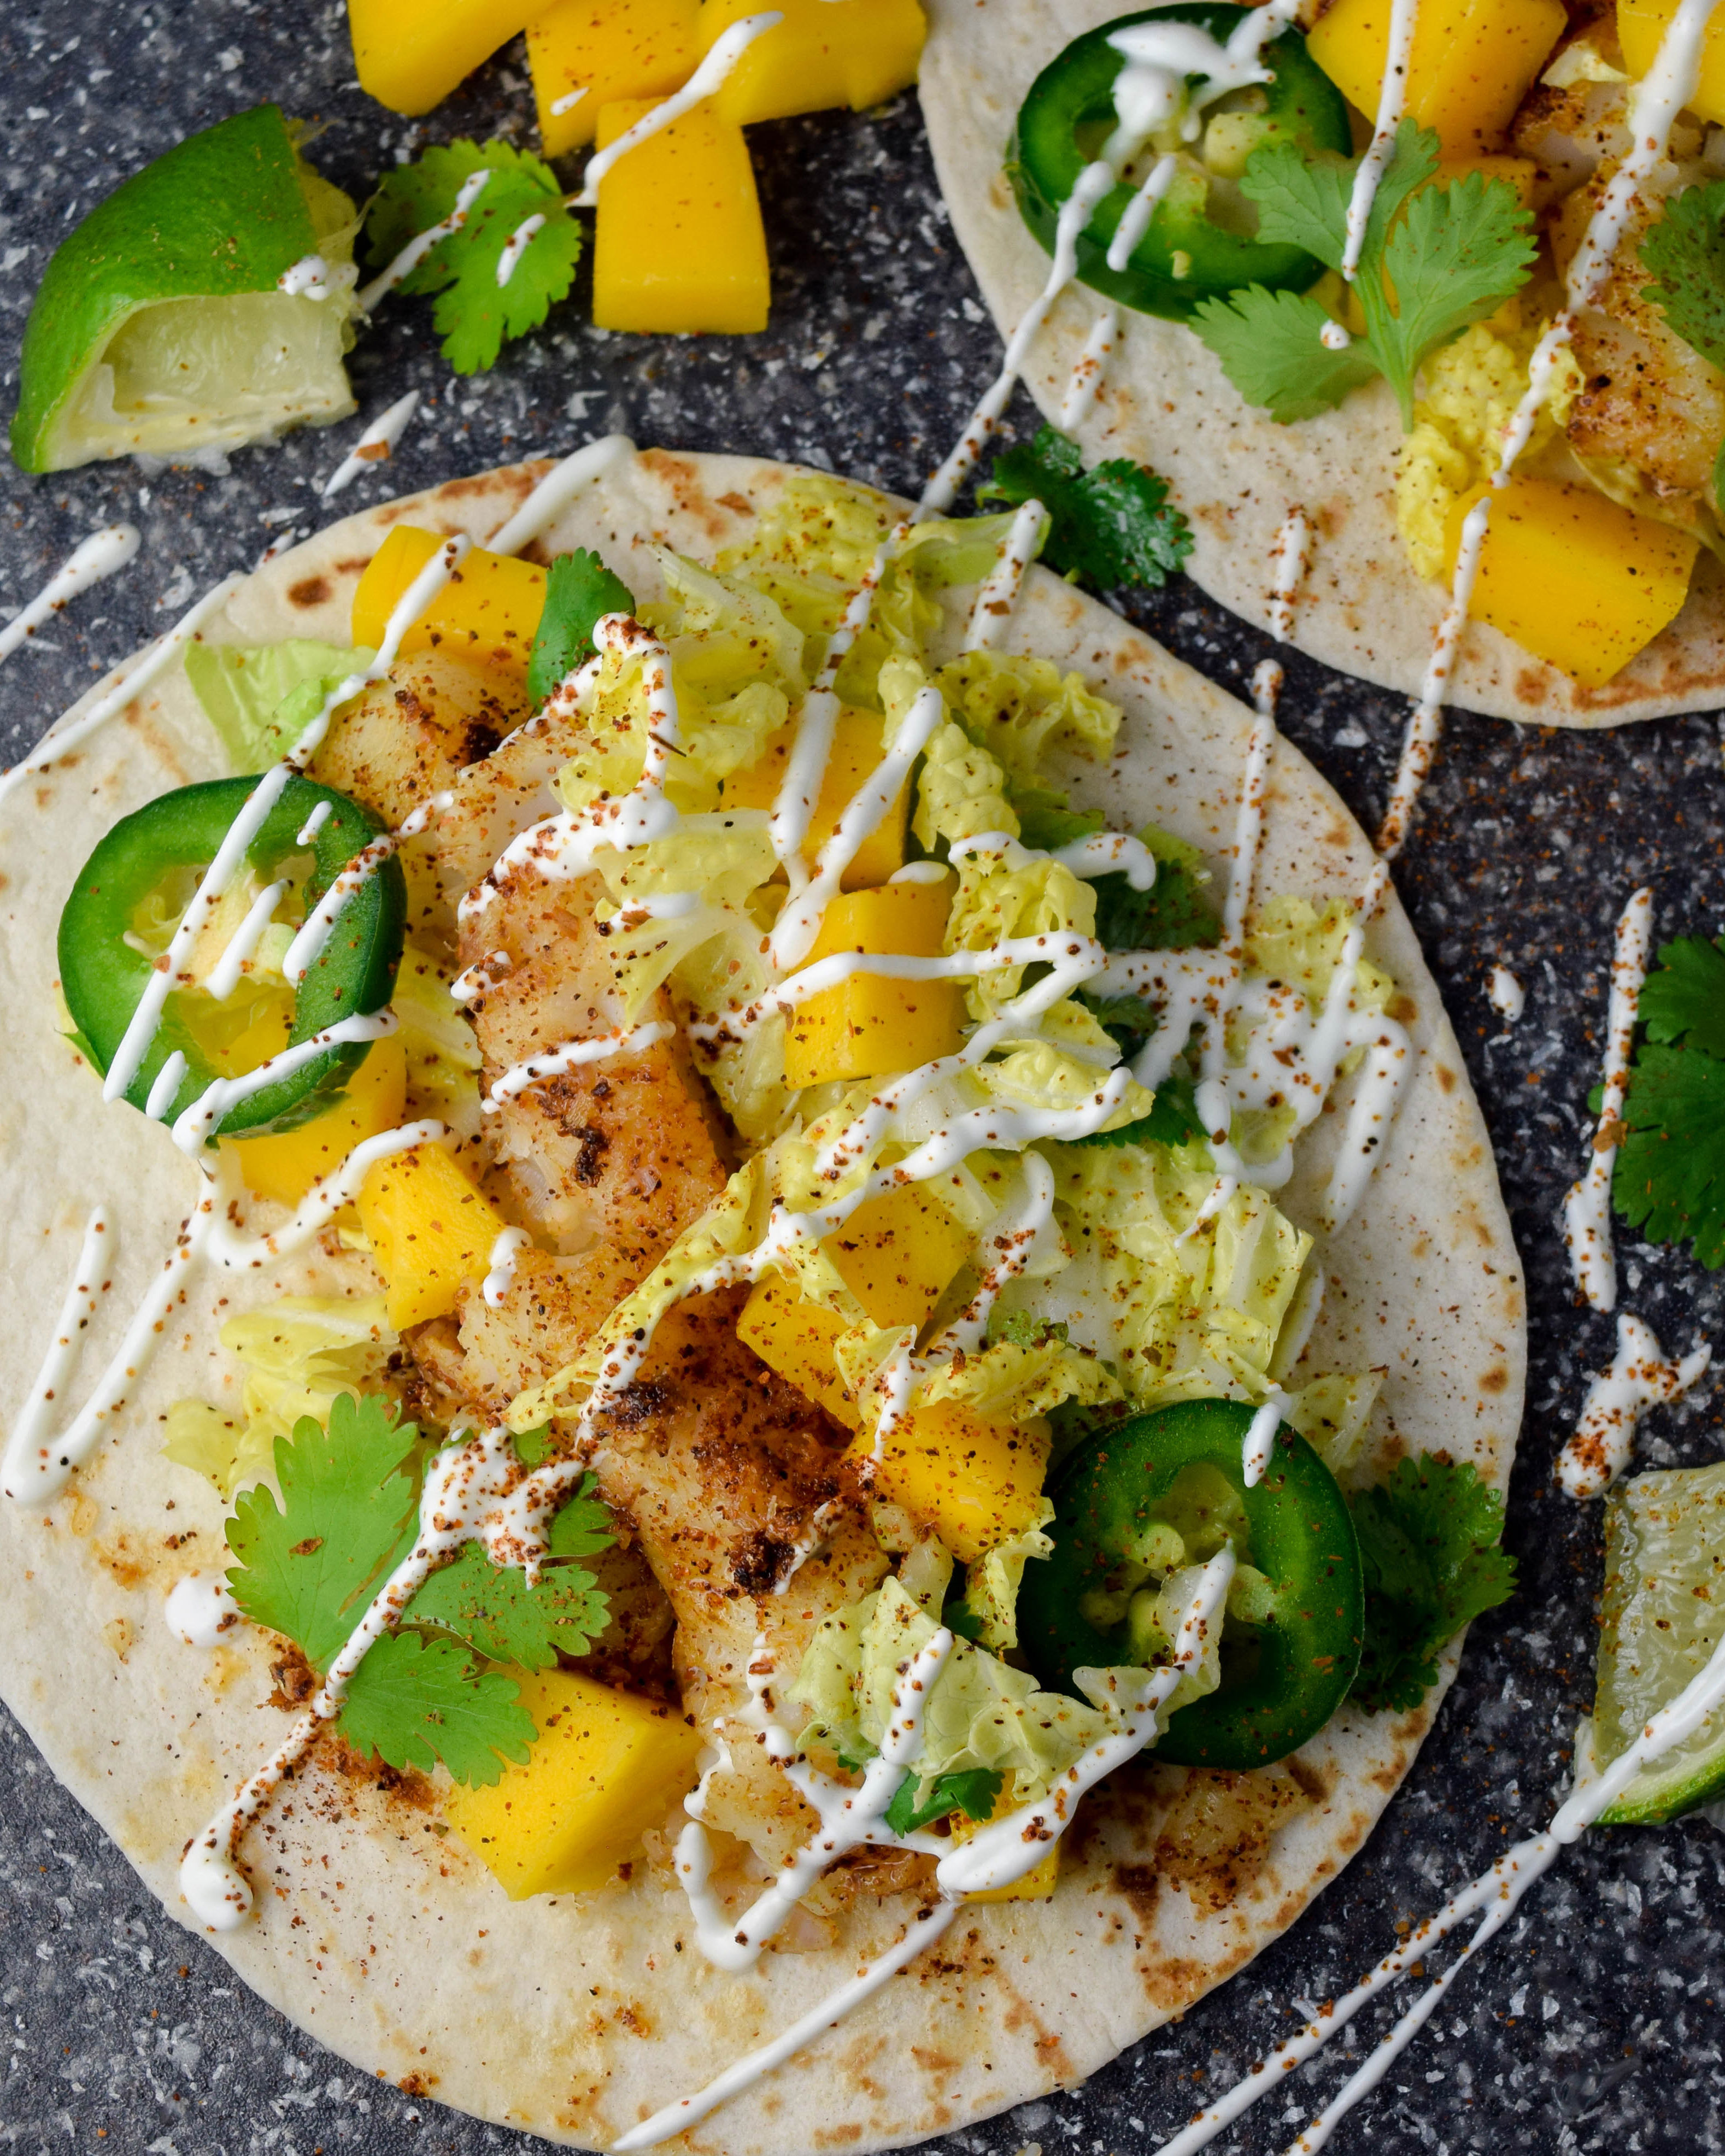 Fish Tacos with Cabbage and Mango